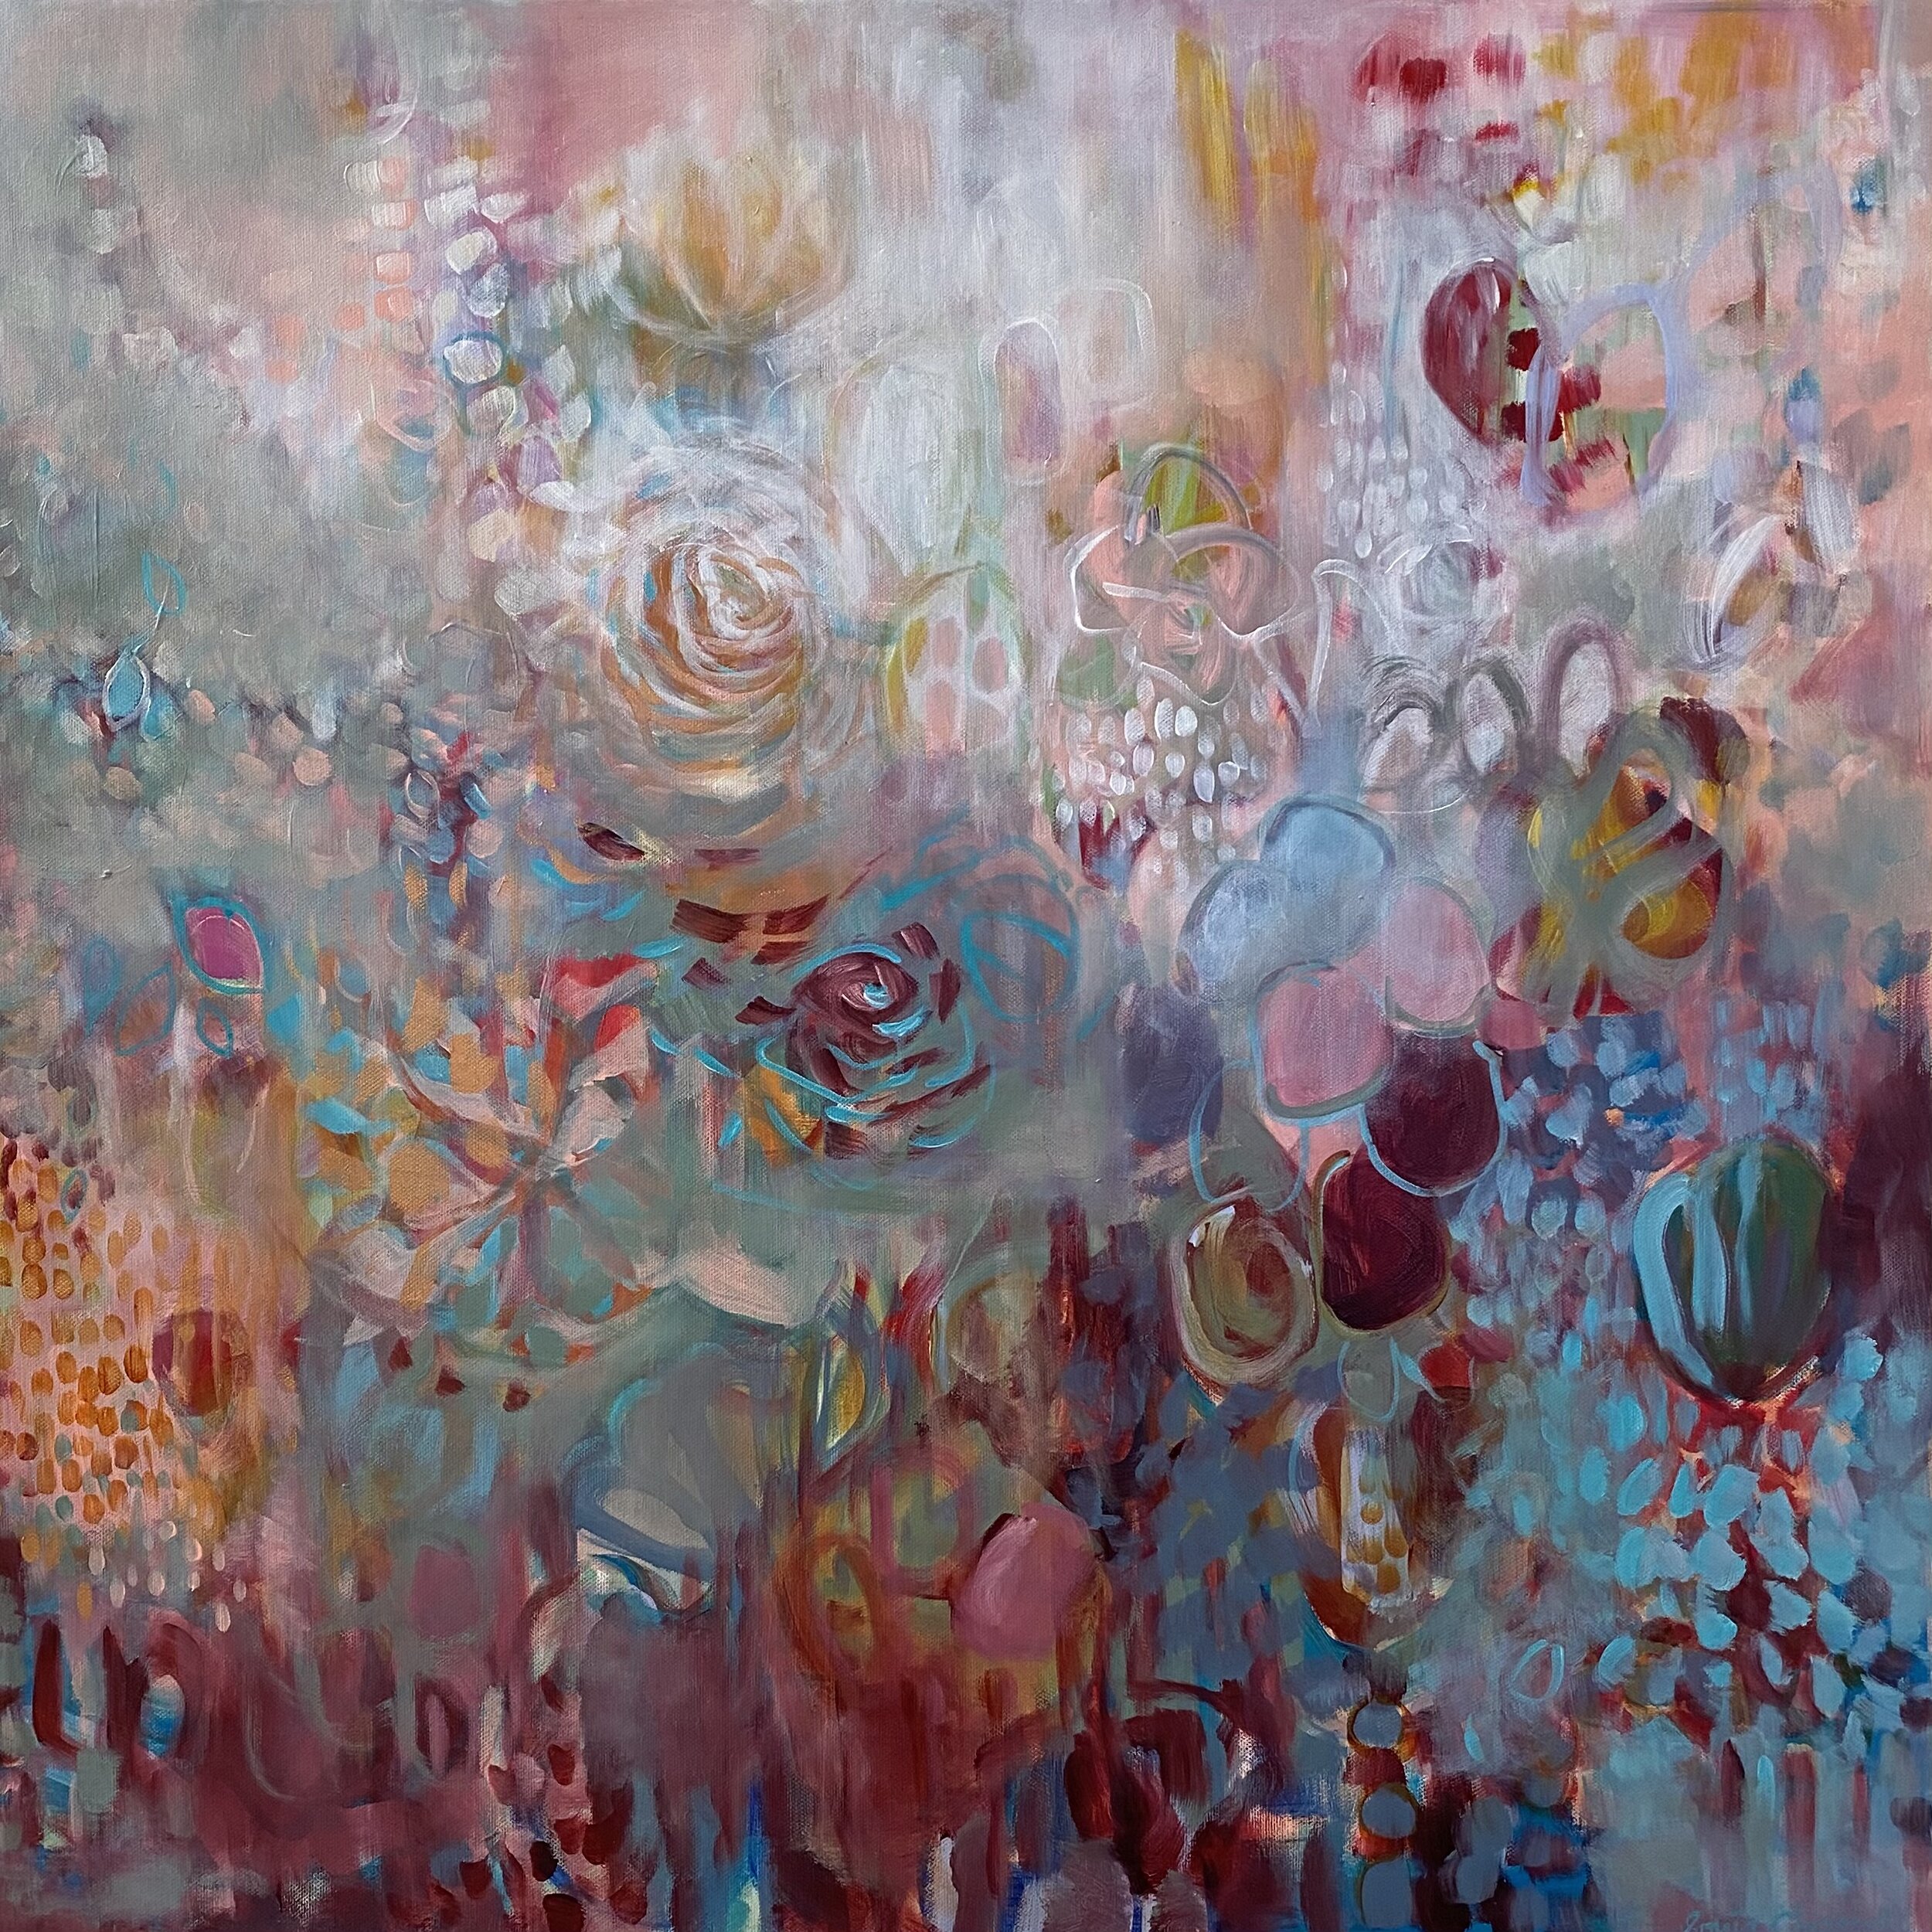 ‘Out of Chaos I’, 75 x 75cm $980